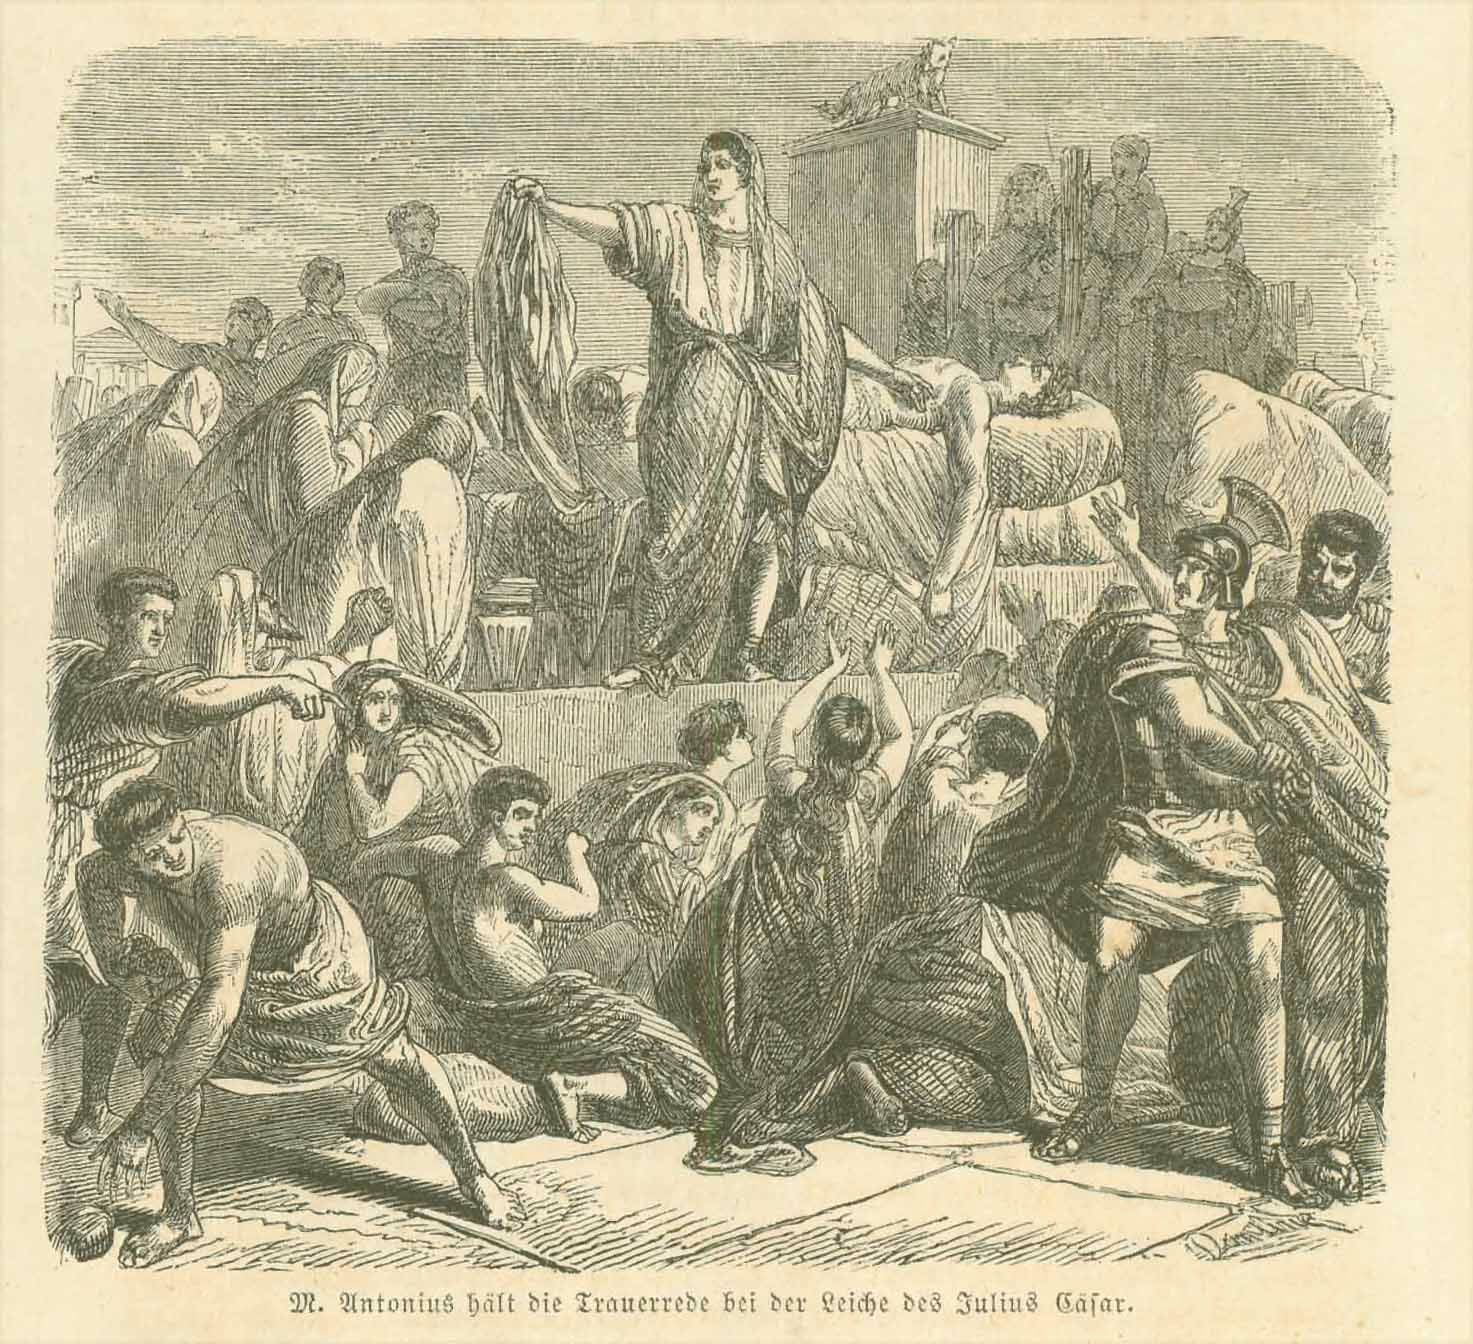 "Antonius haelt die Trauerrede bei der Leiche des Julius Caesar"  Wood engraving showing Antonius giving the eulogy for Julius Ceasar.  The image is on a page of text about the rulers and Senate of Rome. Text continues on reverse side. Published 1862.  Original antique print  